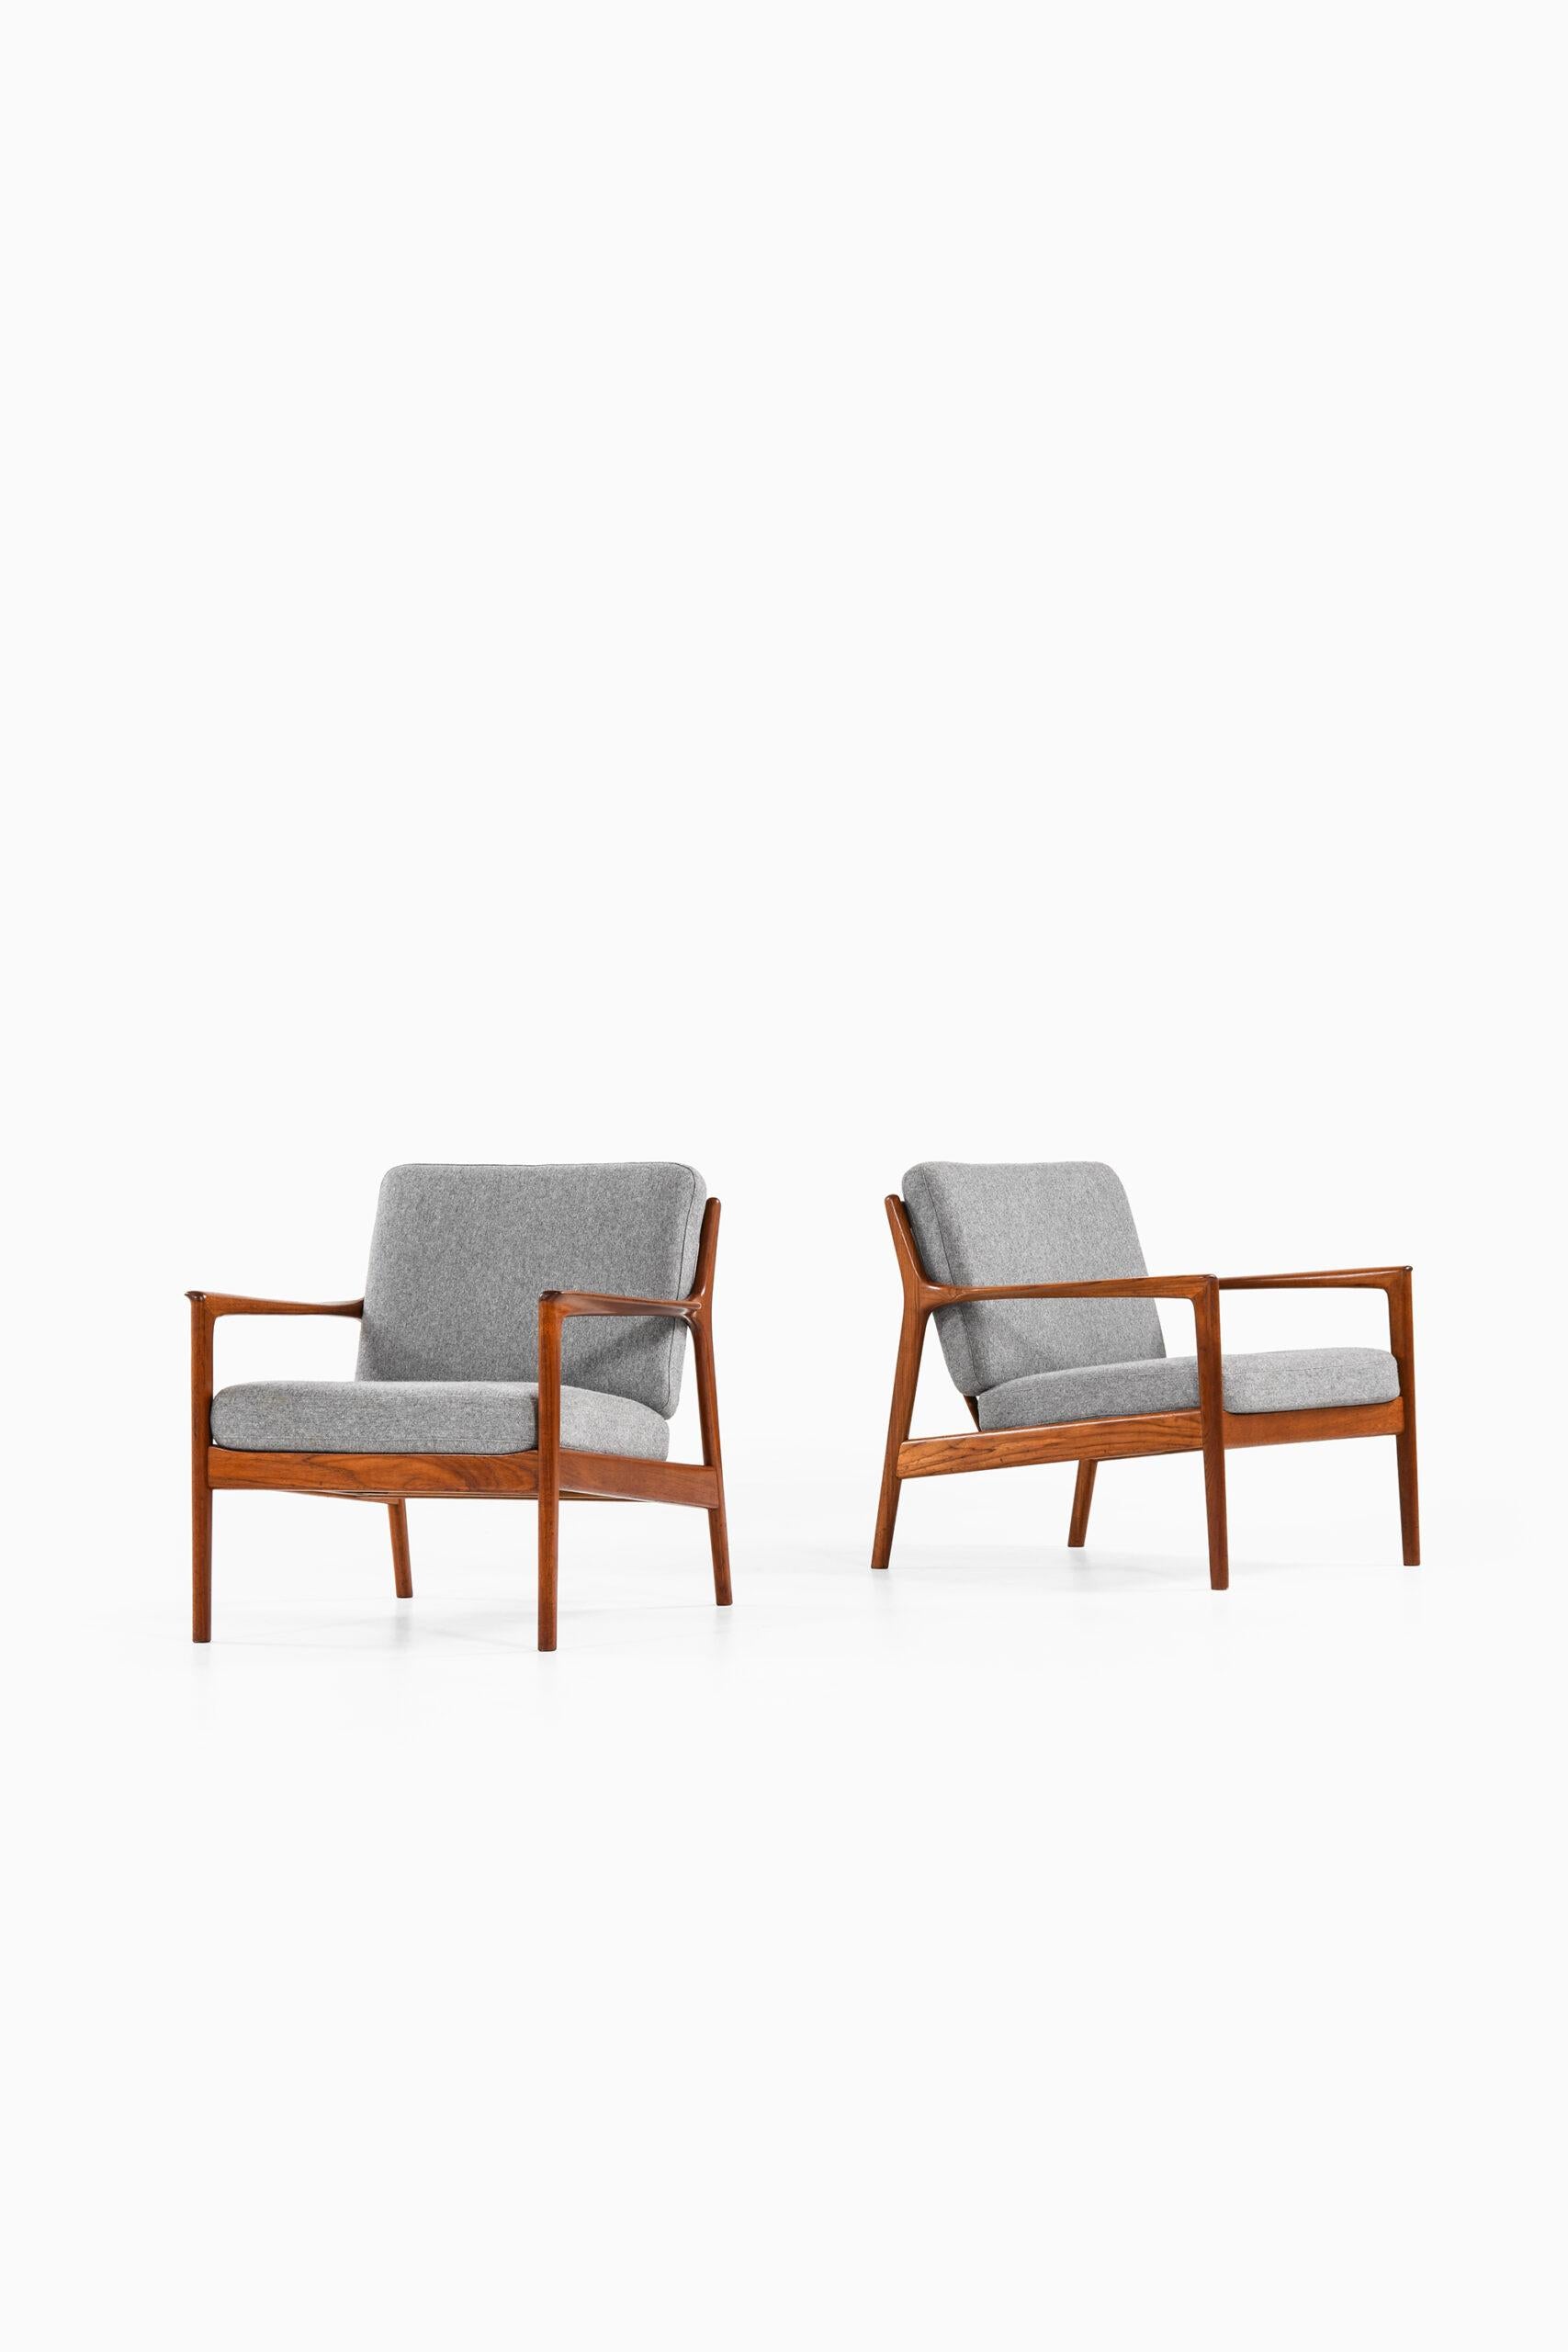 Pair of easy chairs model USA 75 designed by Folke Ohlsson. Produced by DUX in Sweden.